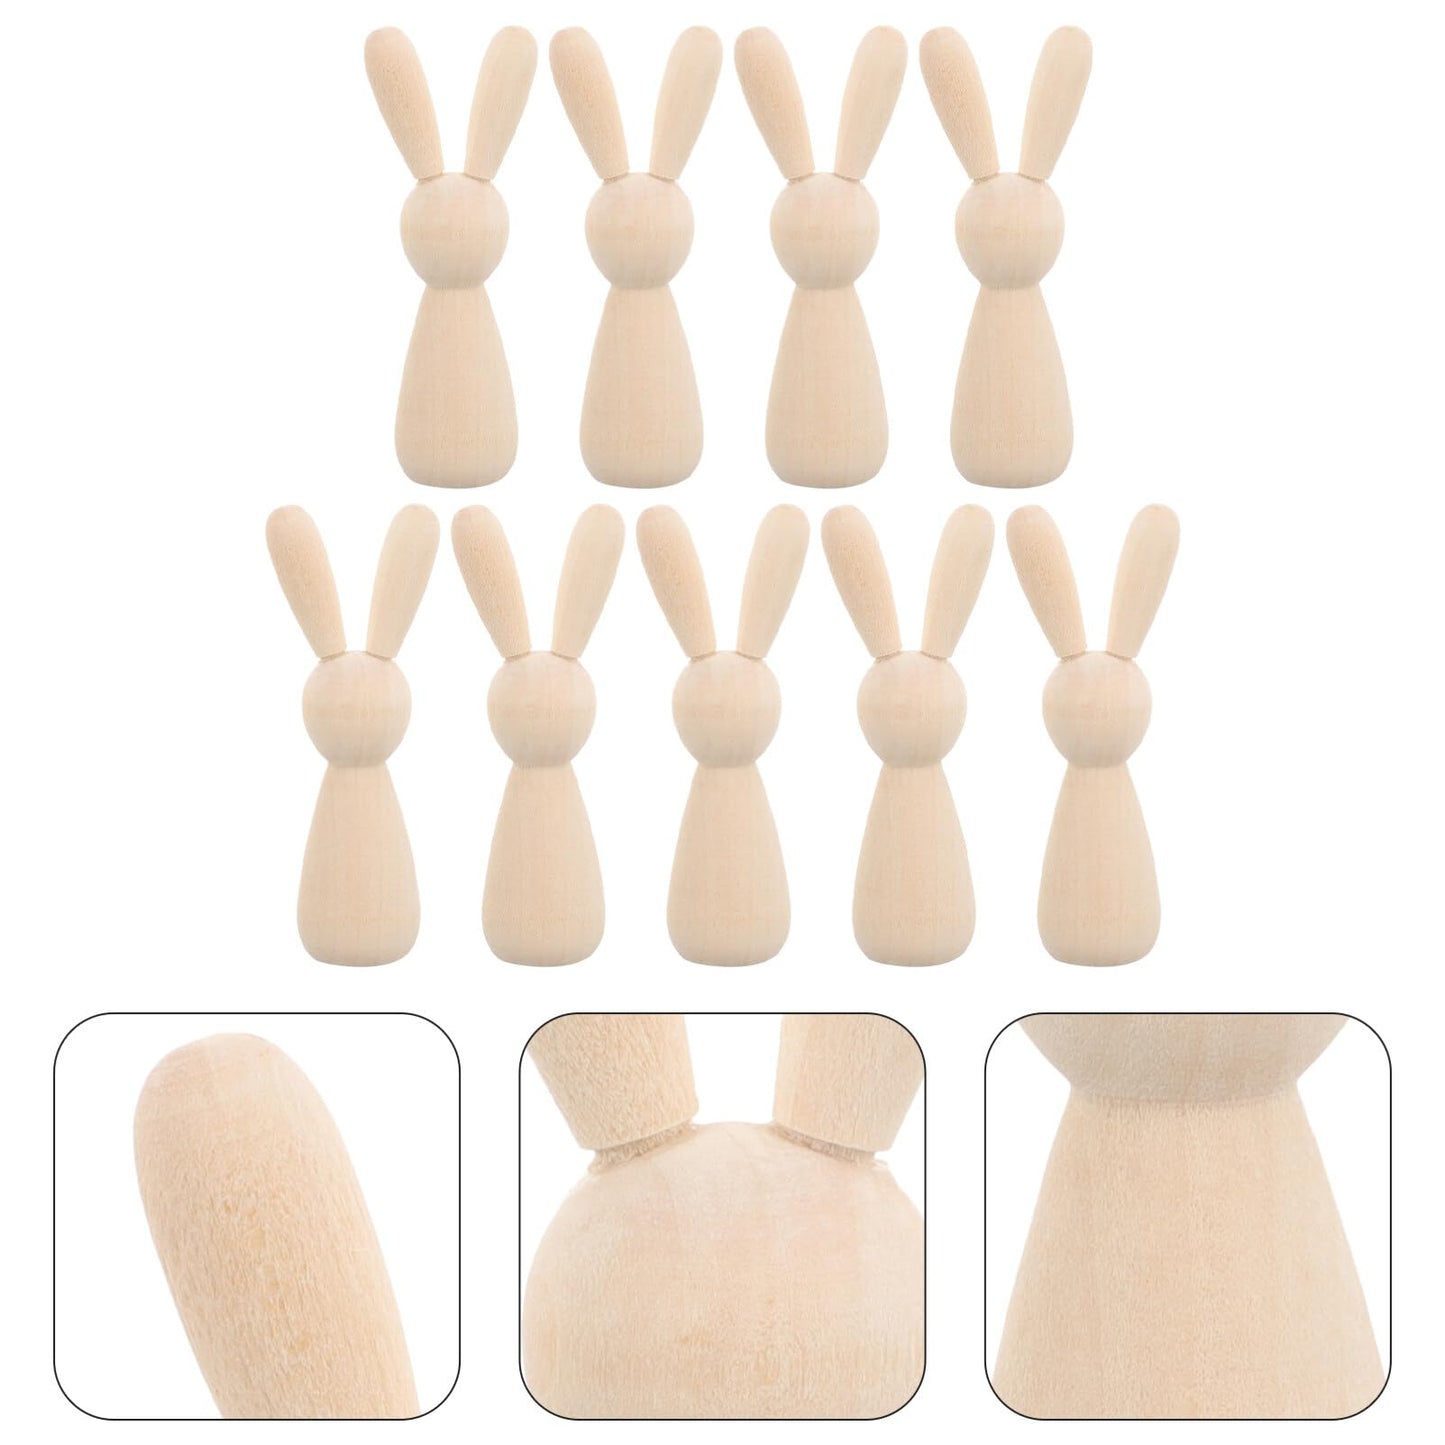 VILLCASE 10pcs House Decorations for Home Wooden Playset Home Accessories Decor Shelf Decorations Wooden Toys Wooden Rabbits Unfinished Wood Peg